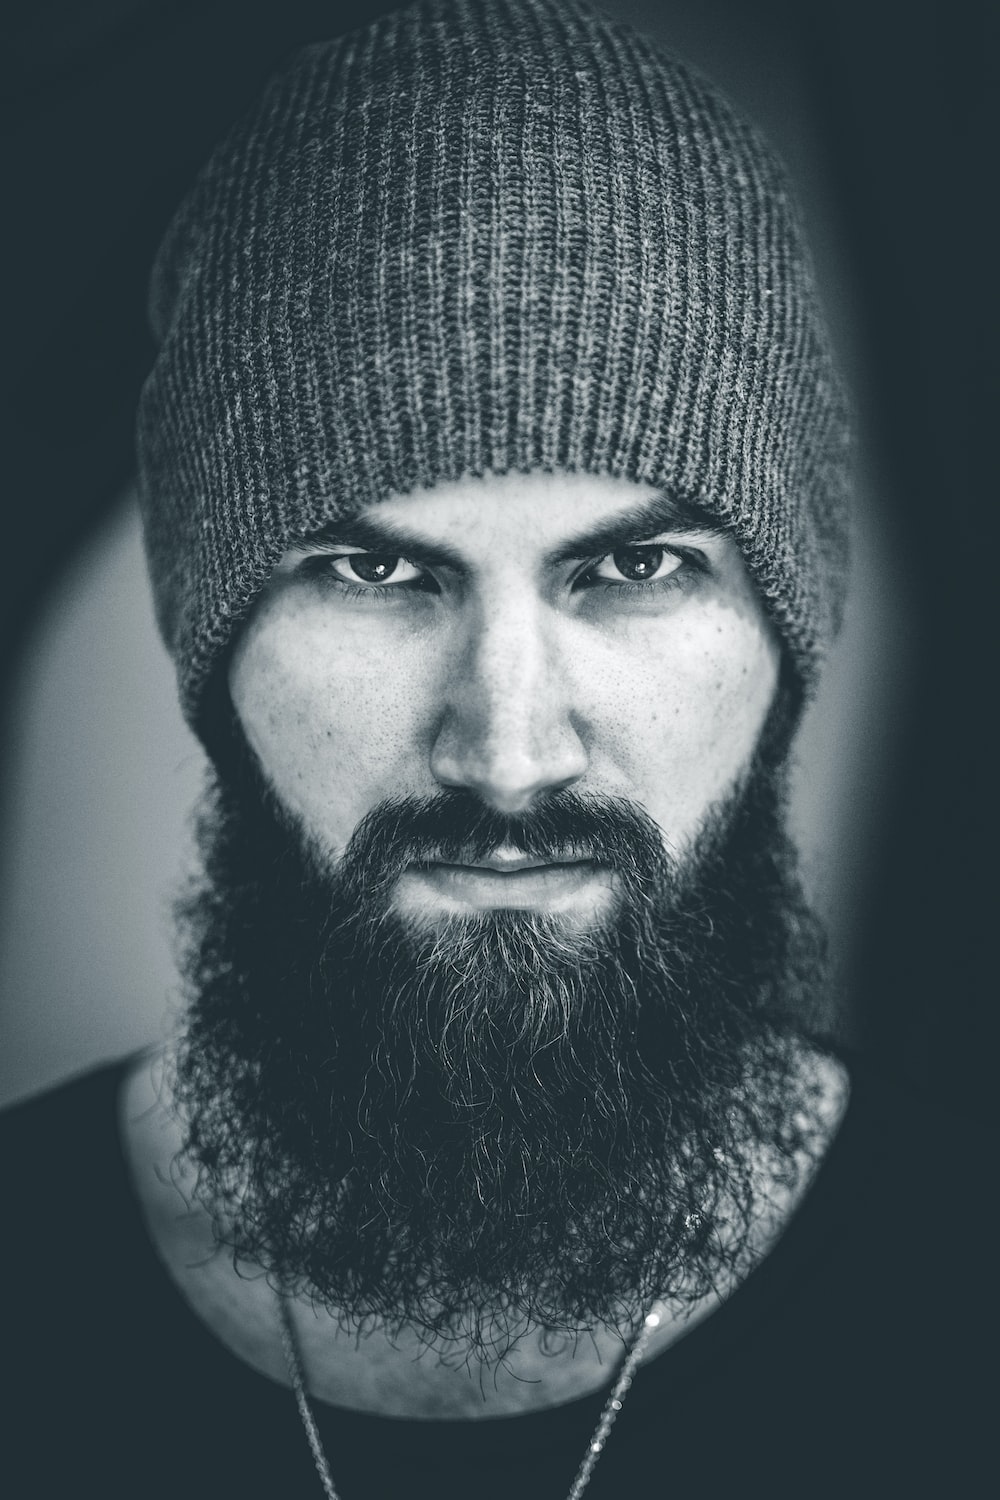 Beard man pictures download free images on